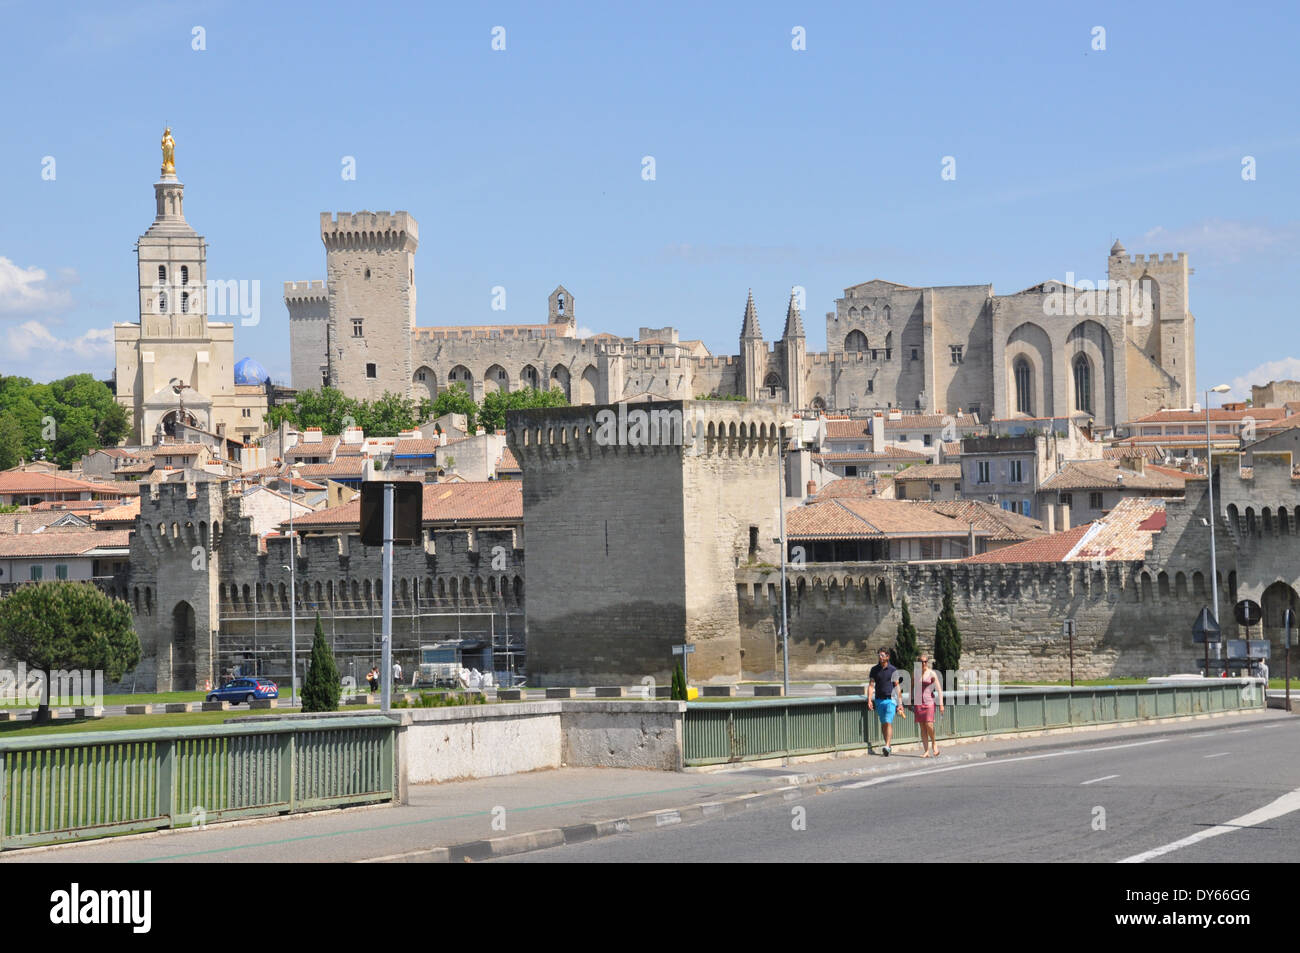 Two people crossing the Pont Edouard Daladier, with the Palais des Papes in the background, Avignon, Stock Photo